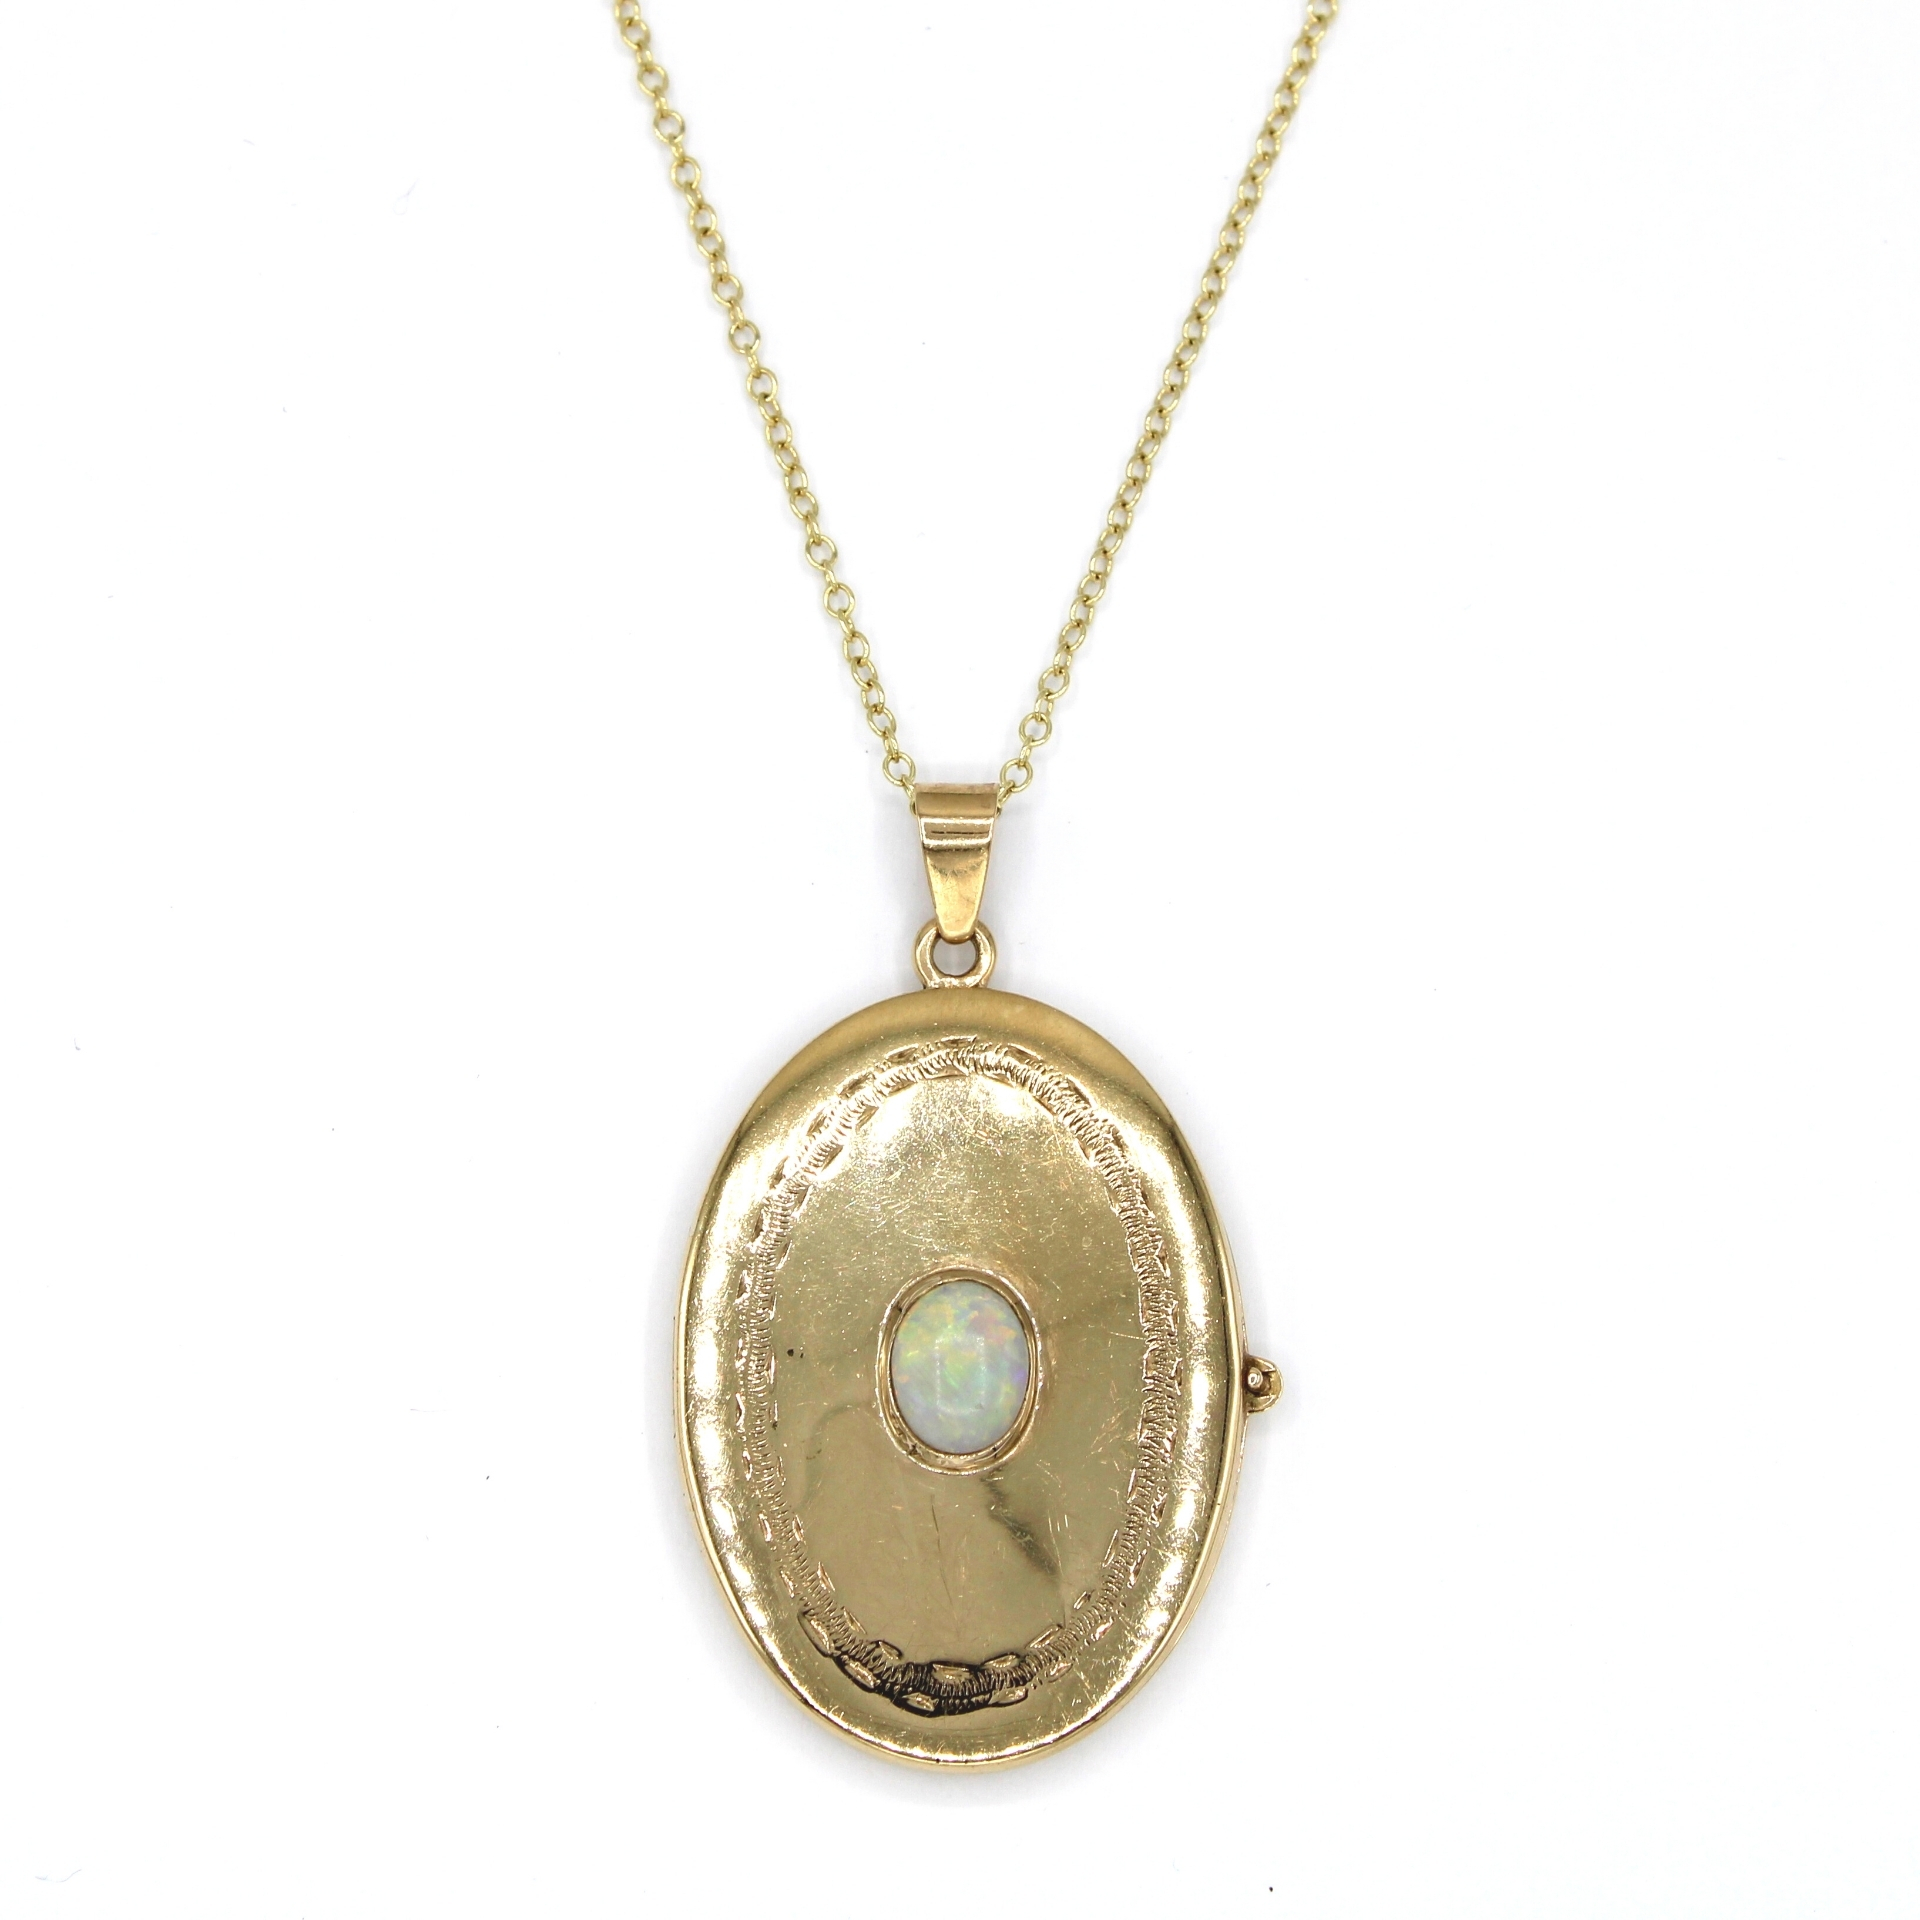 Antique Russian Jeweled Gold Locket Pendant Ref: 199116 - Antique Jewelry |  Vintage Rings | Faberge EggsAntique Jewelry | Vintage Rings | Faberge Eggs